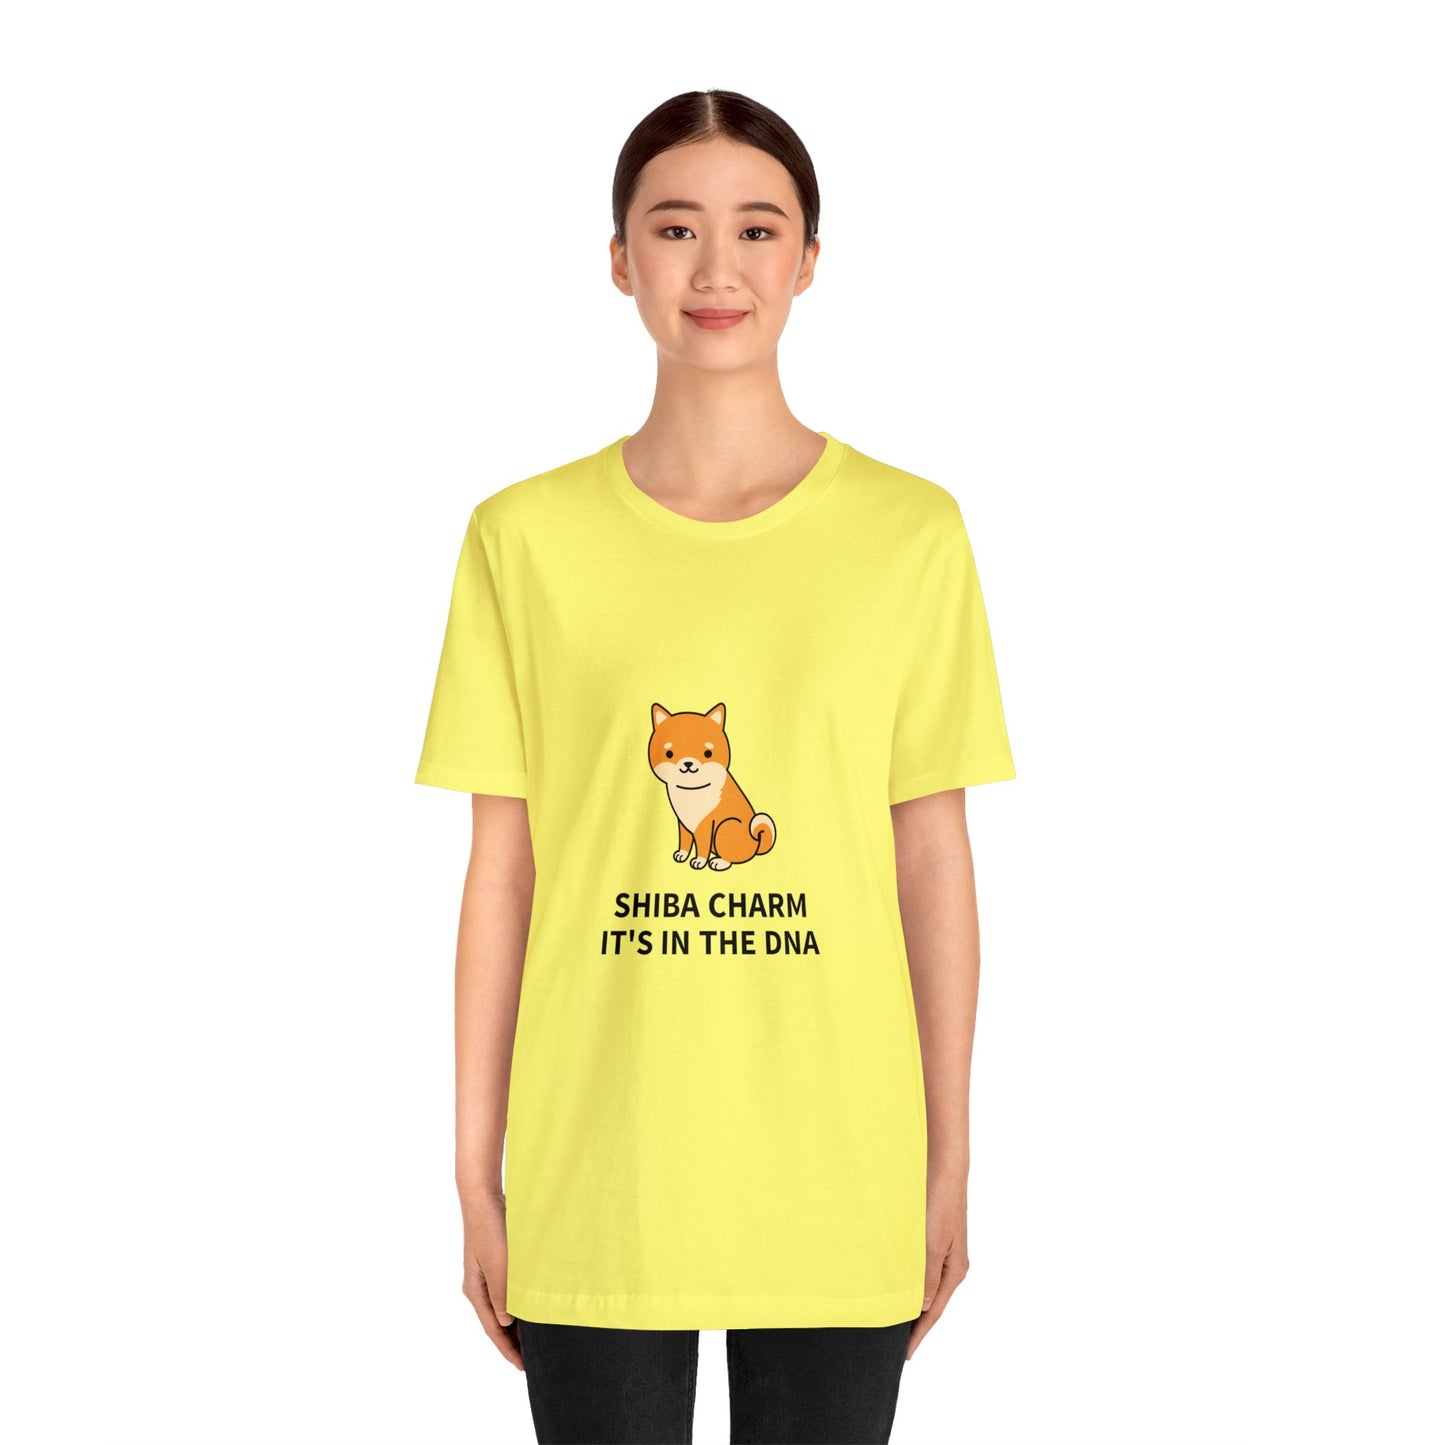 Shiba Charm It's in the DNA Unisex Jersey Short Sleeve Tee - Pet Lovers